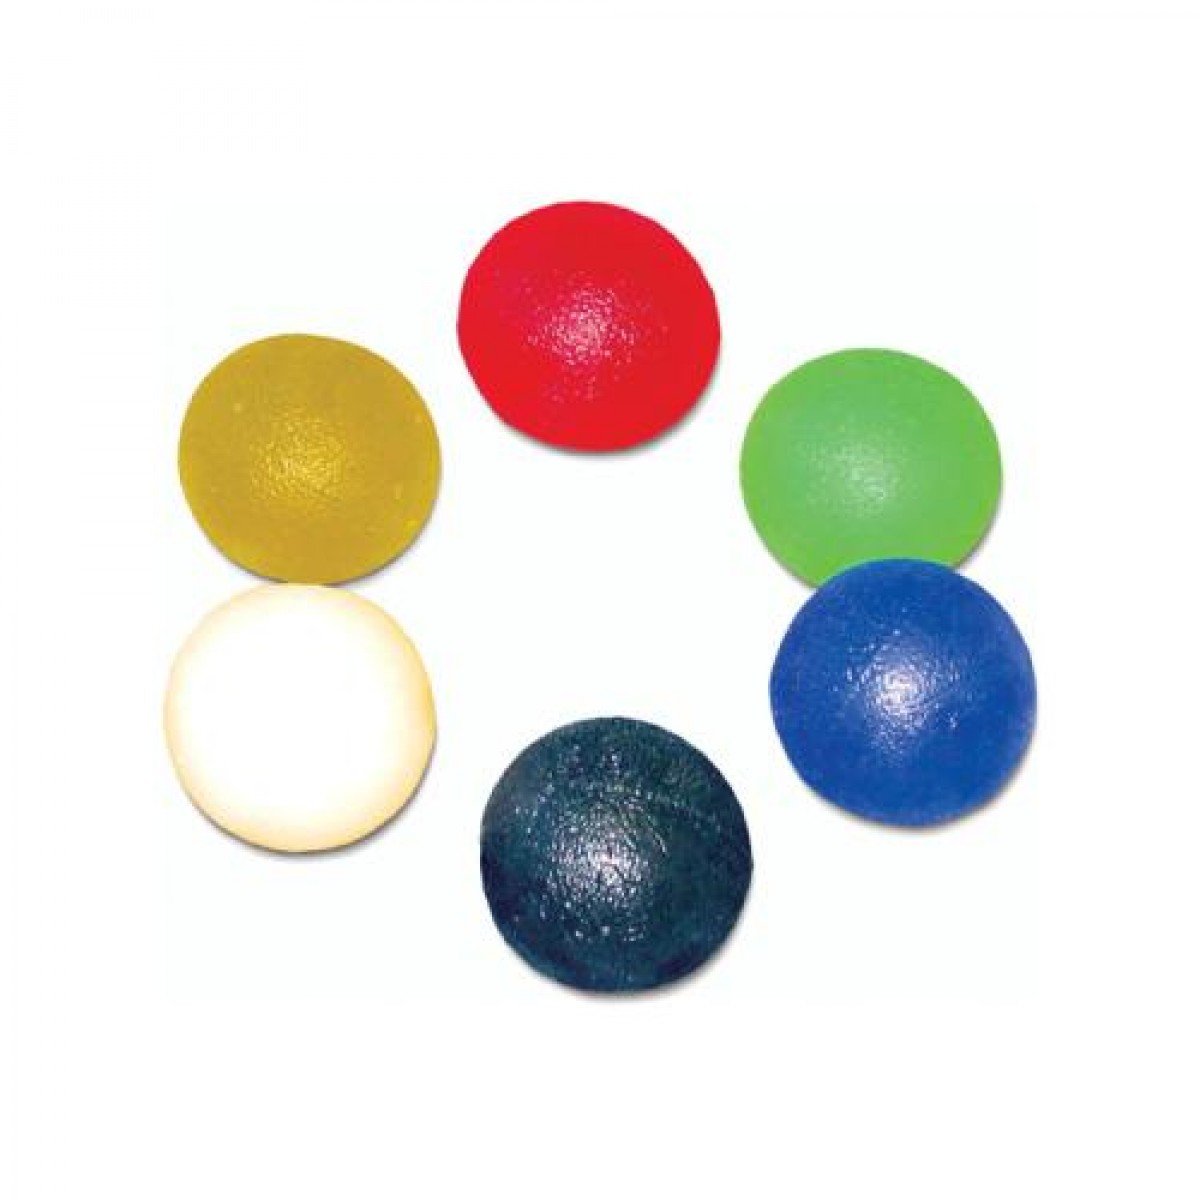 FAB 101494 EA/1 CANDO GEL HAND  EXERCISE BALL ,BLUE, HEAVY STRENGHT